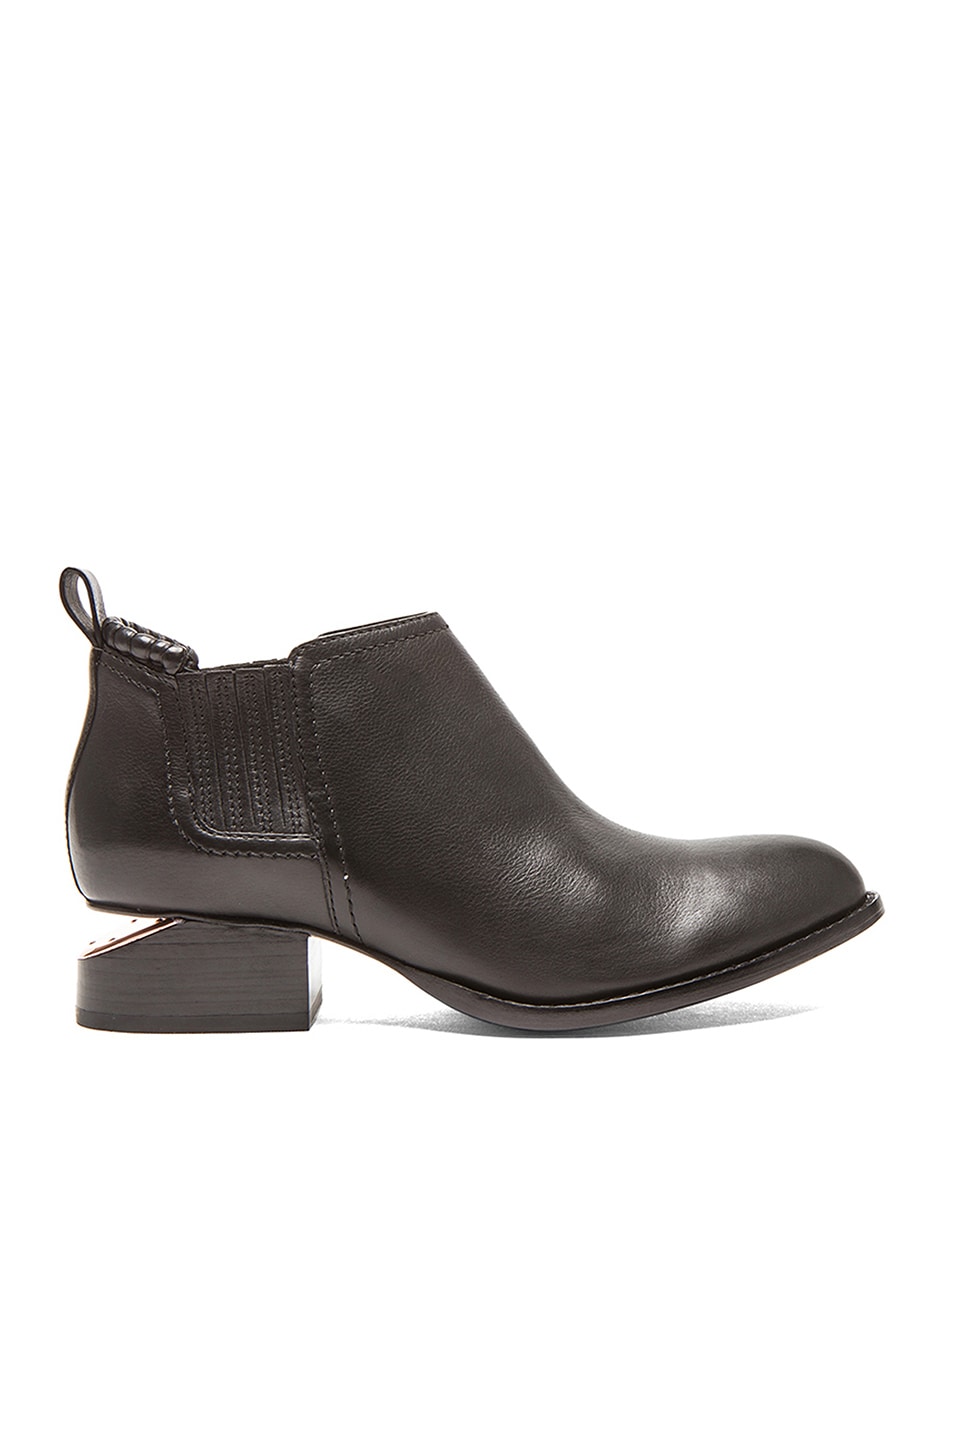 Image 1 of Alexander Wang Kori Leather Ankle Boots with Rose Gold Hardware in Black